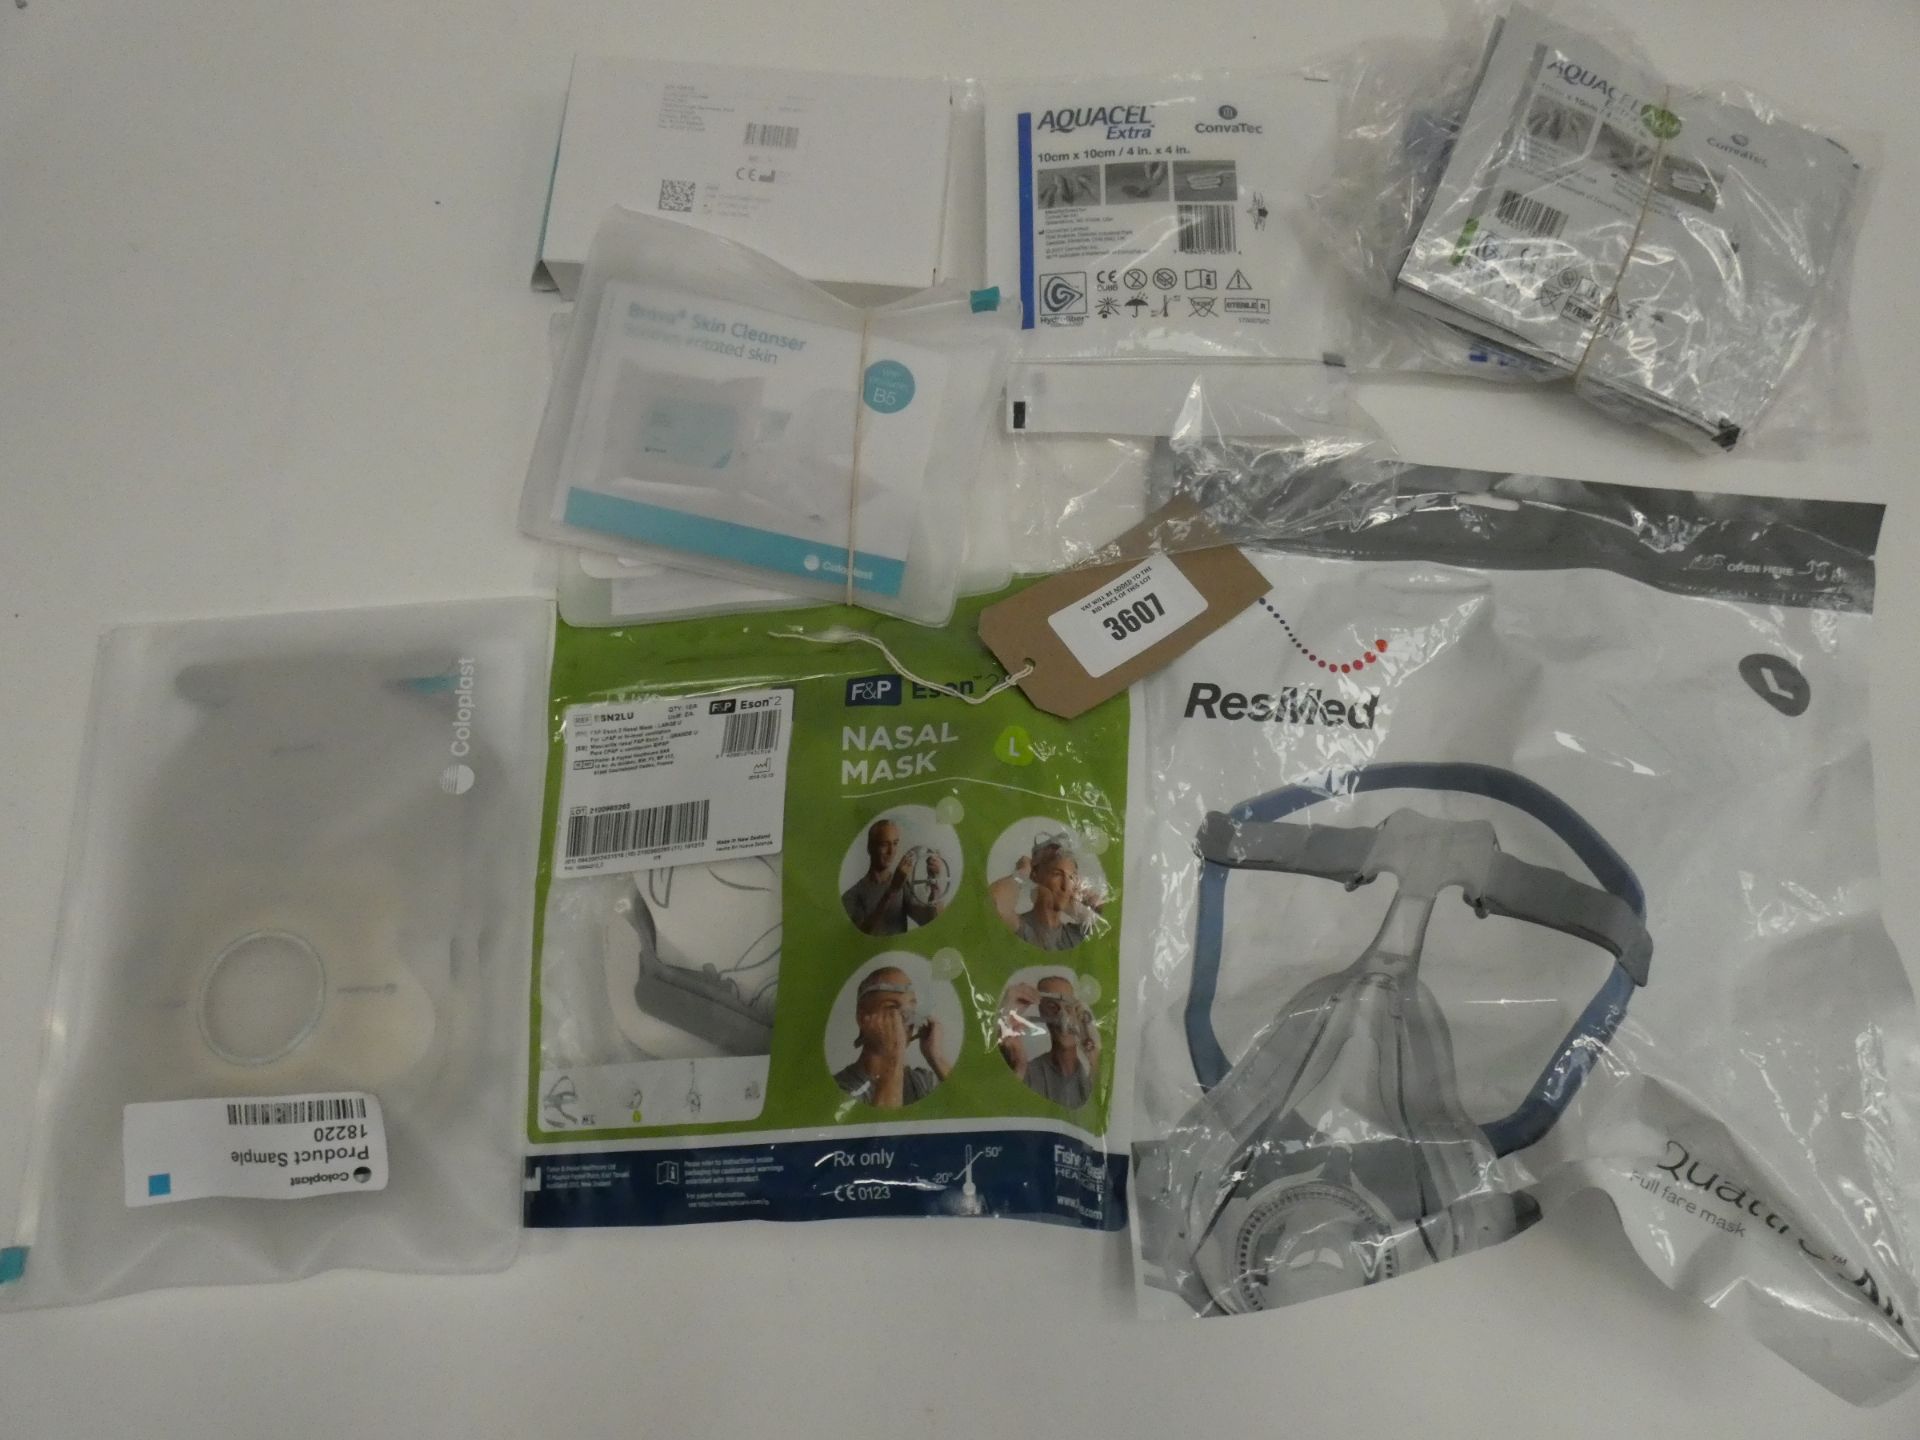 Bag containing CPAP masks, Aquacel dressing patches, colostomy bags etc